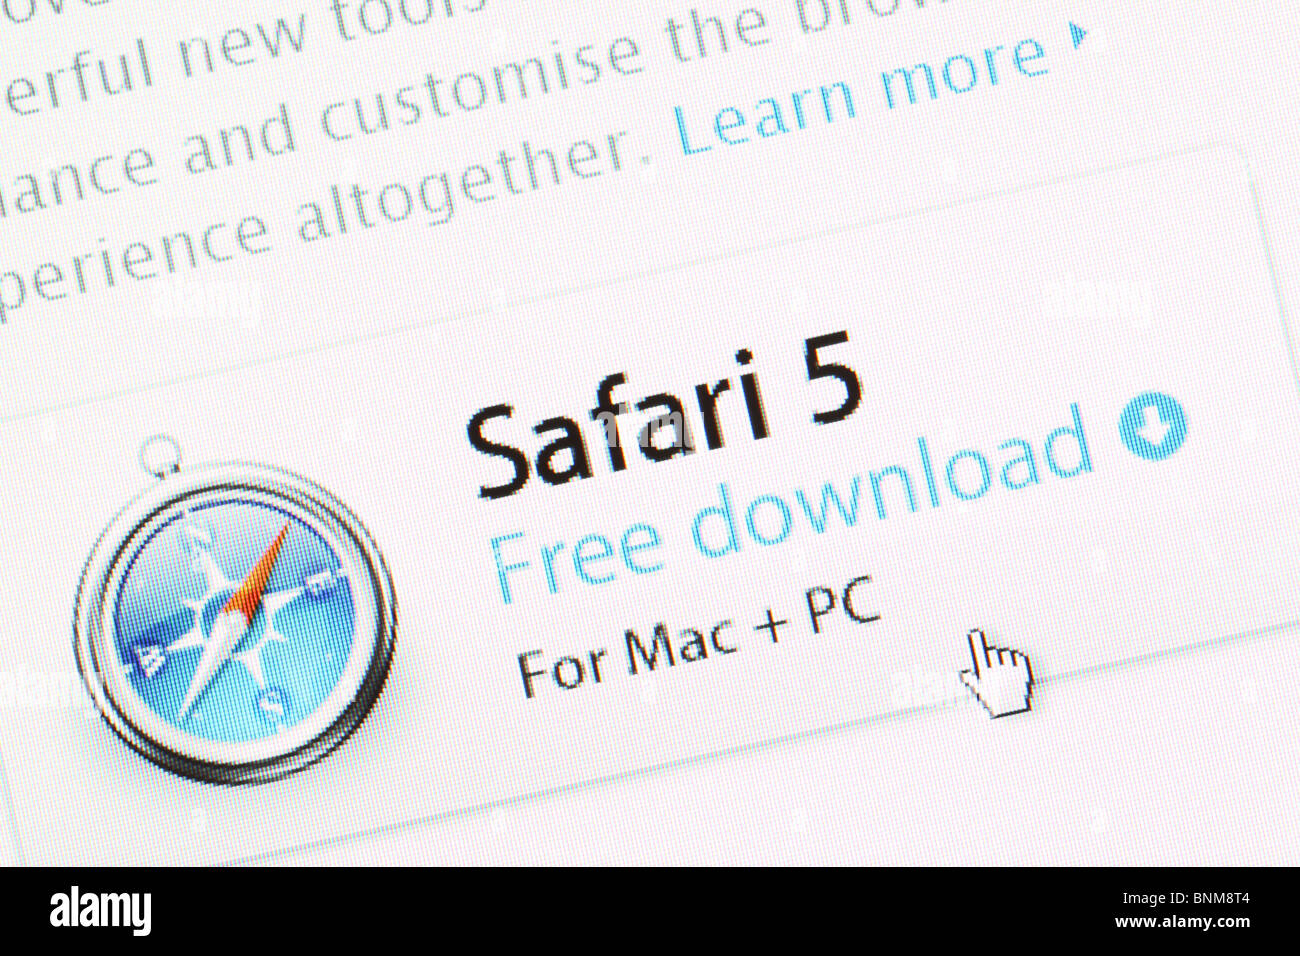 Safari 5 internet web browser www for Mac and PC computer Stock Photo